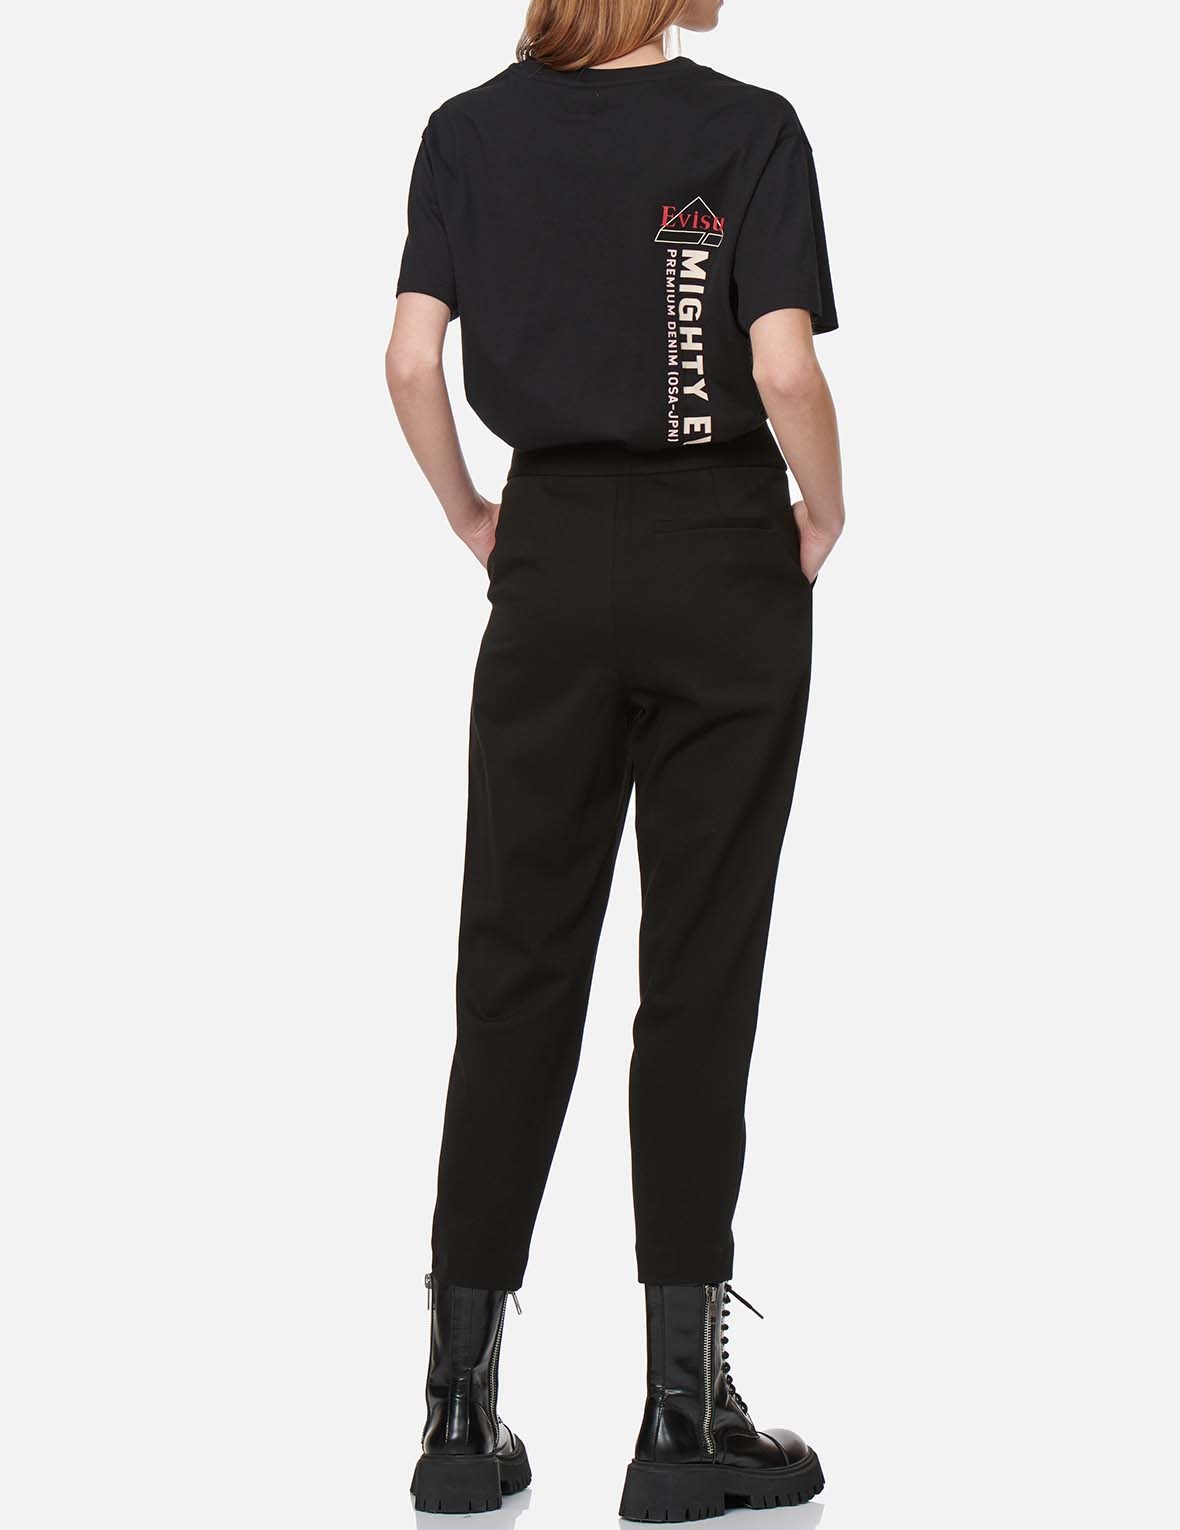 SEAGULL EMBROIDERED TAPER PANTS - 6